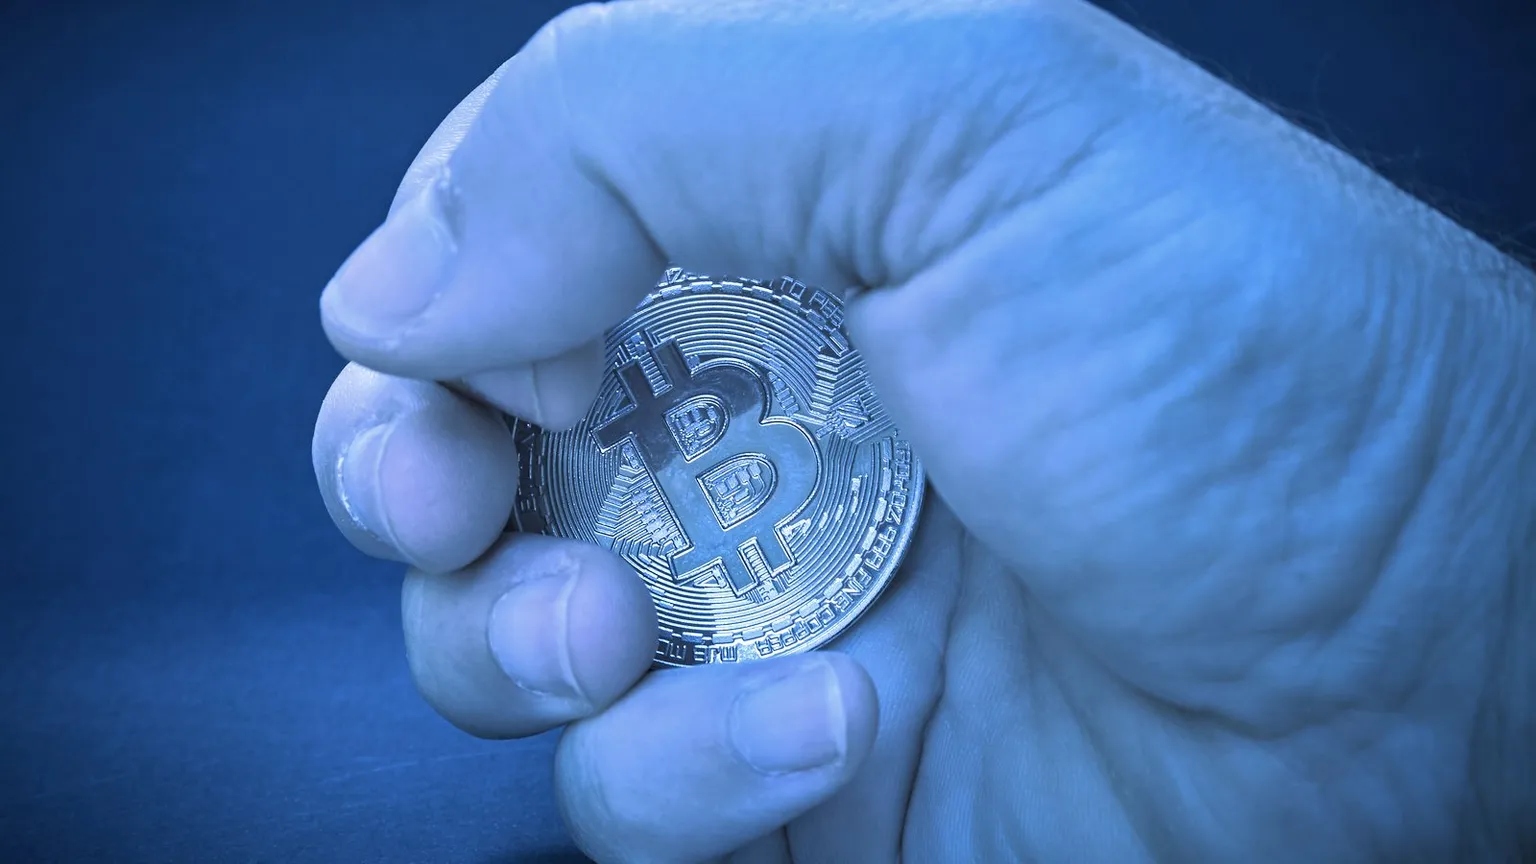 Getting some Bitcoin back. Image: Shutterstock